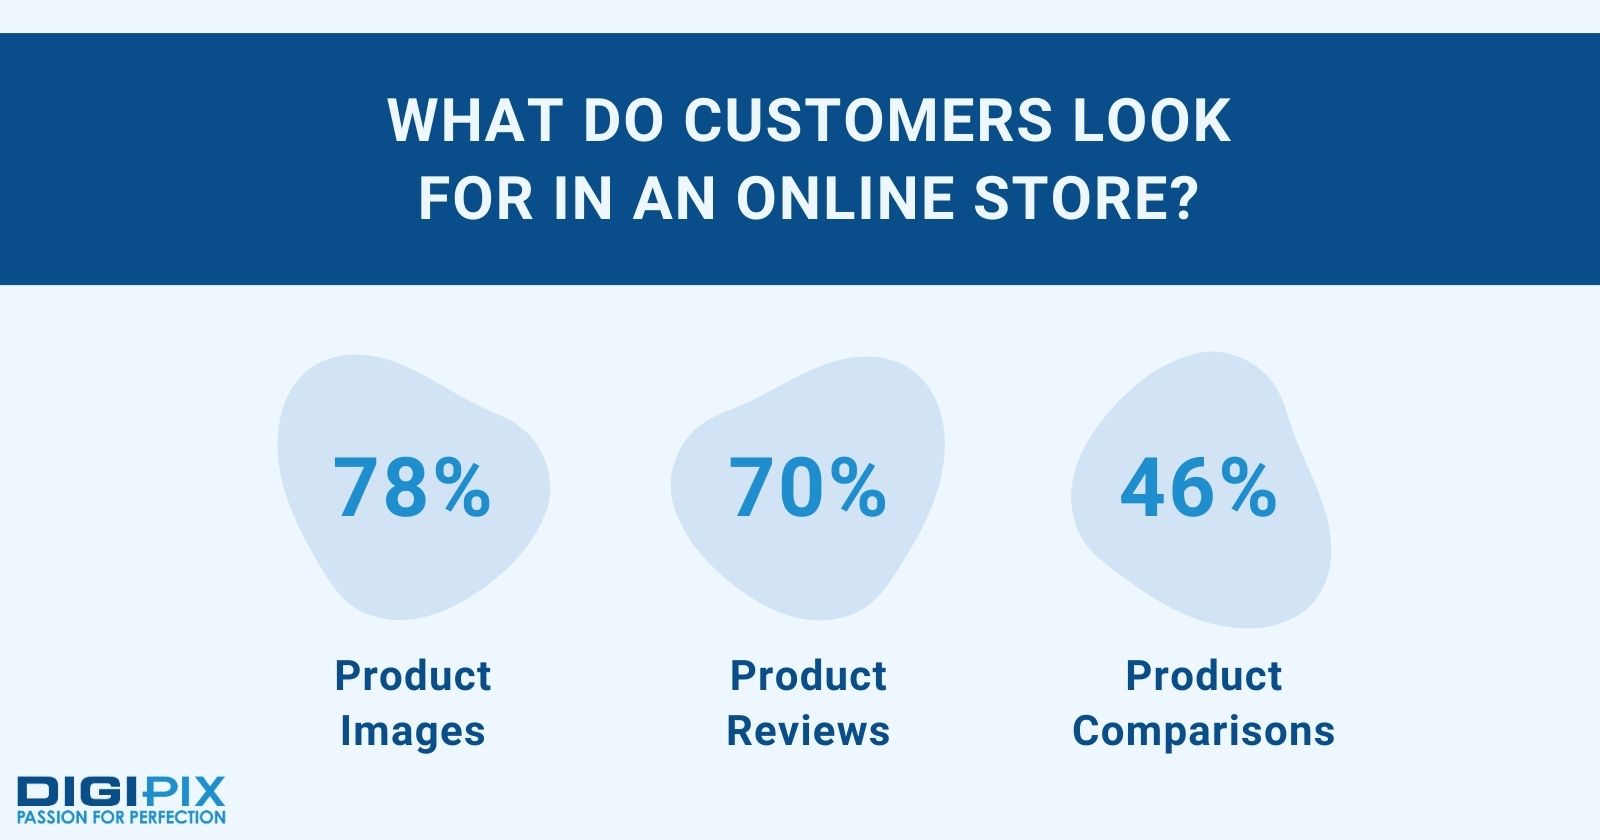 What customers look for in an online store